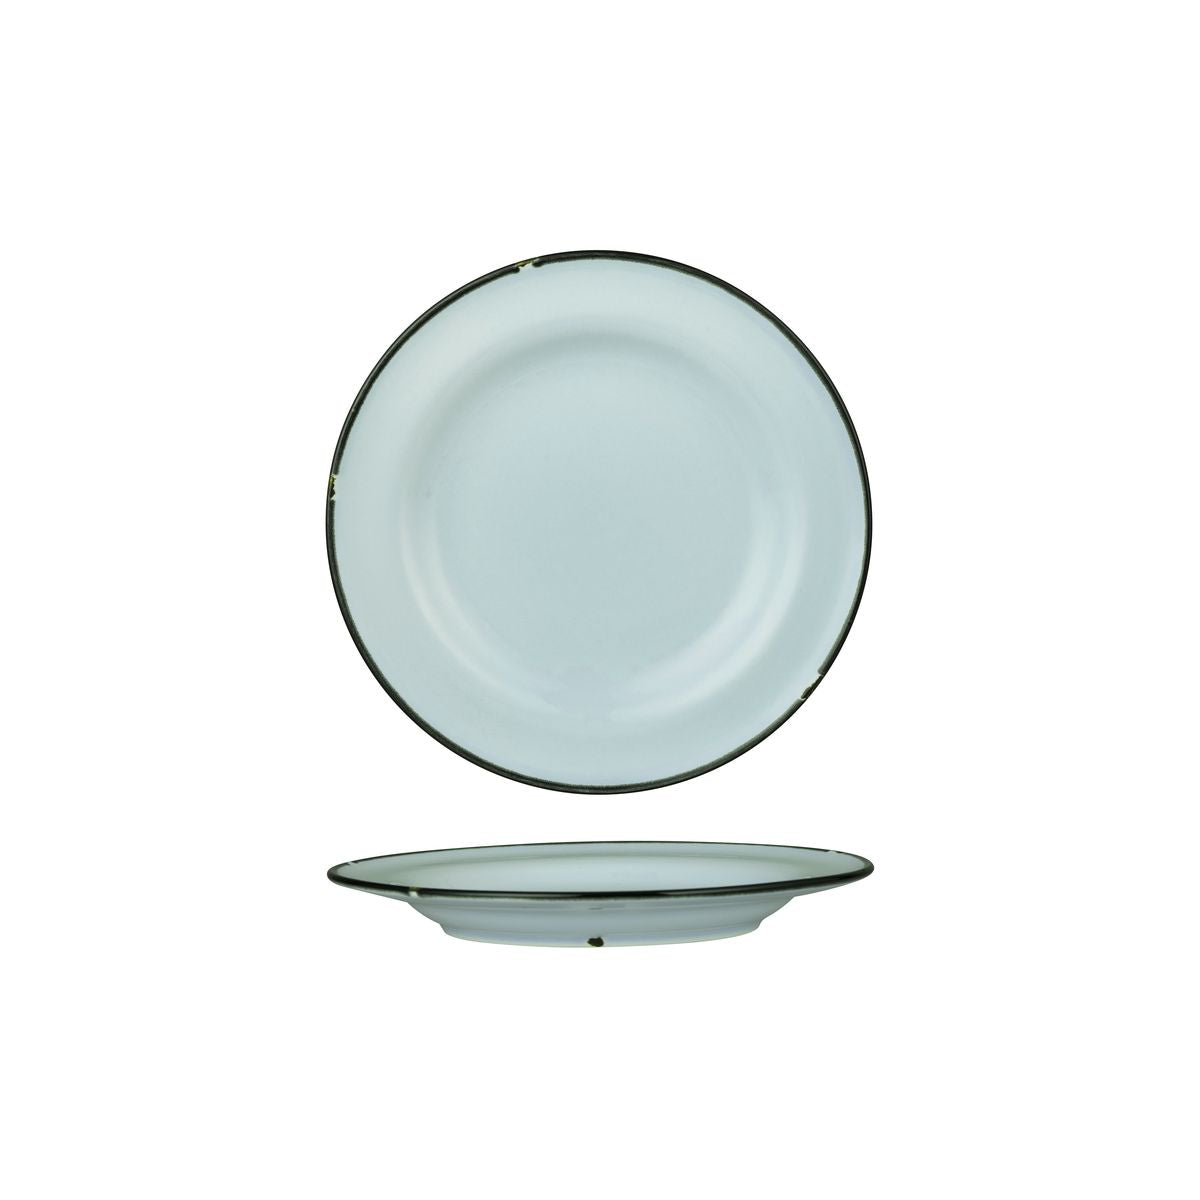 Round Plate - 210mm, Tintin Blue & Black from Luzerne. made out of Ceramic and sold in boxes of 12. Hospitality quality at wholesale price with The Flying Fork! 